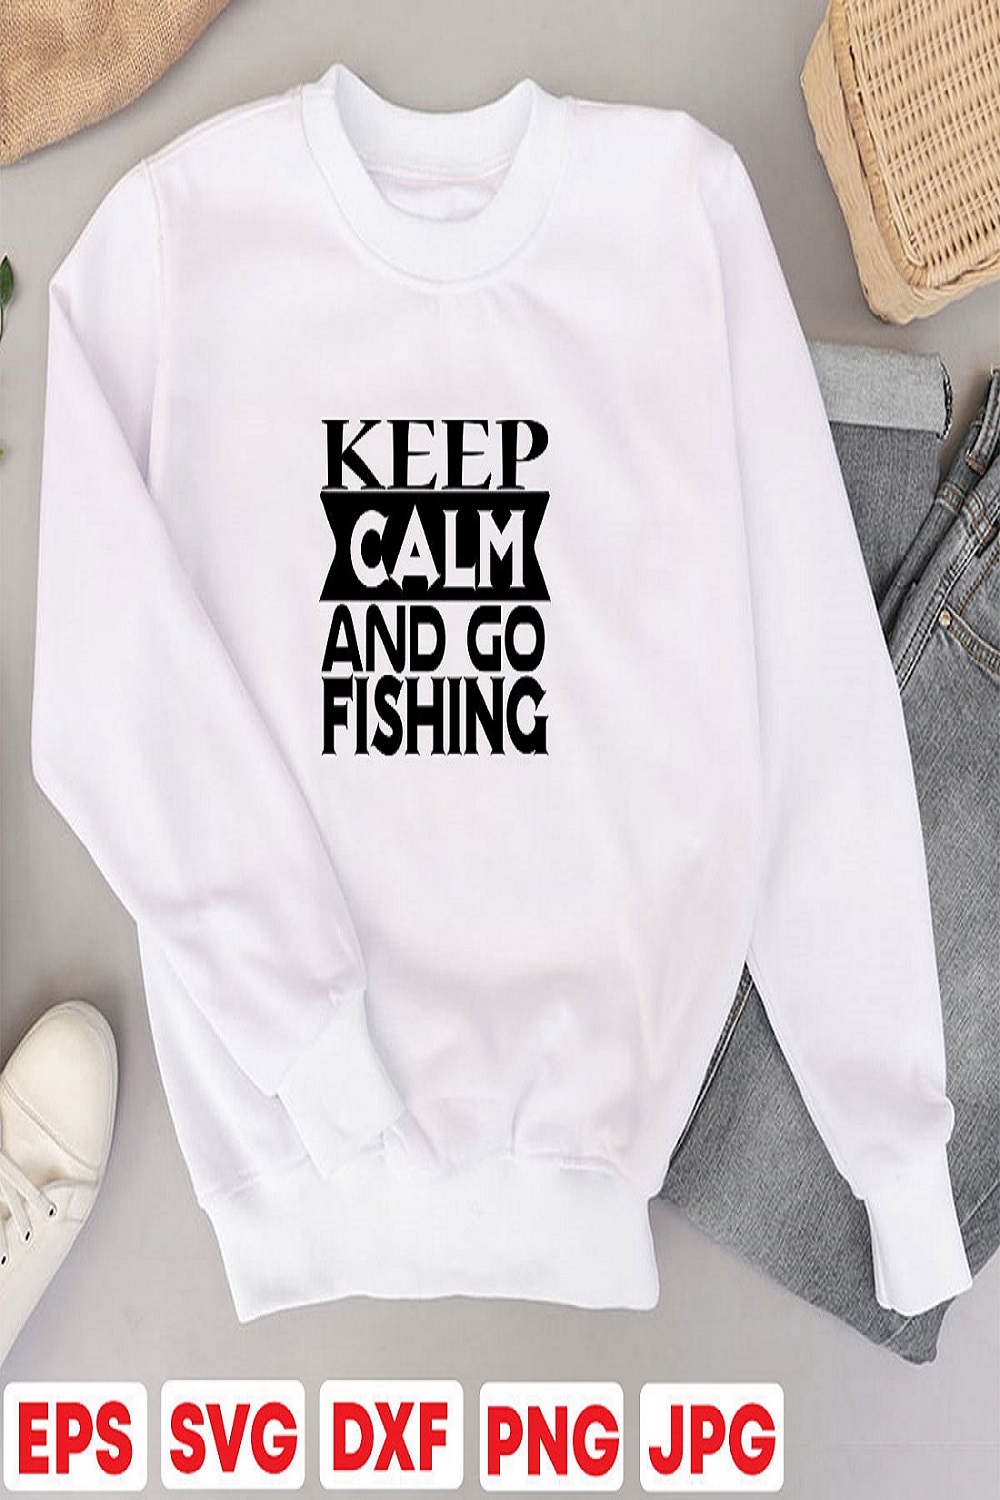 Keep calm and fishing pinterest preview image.